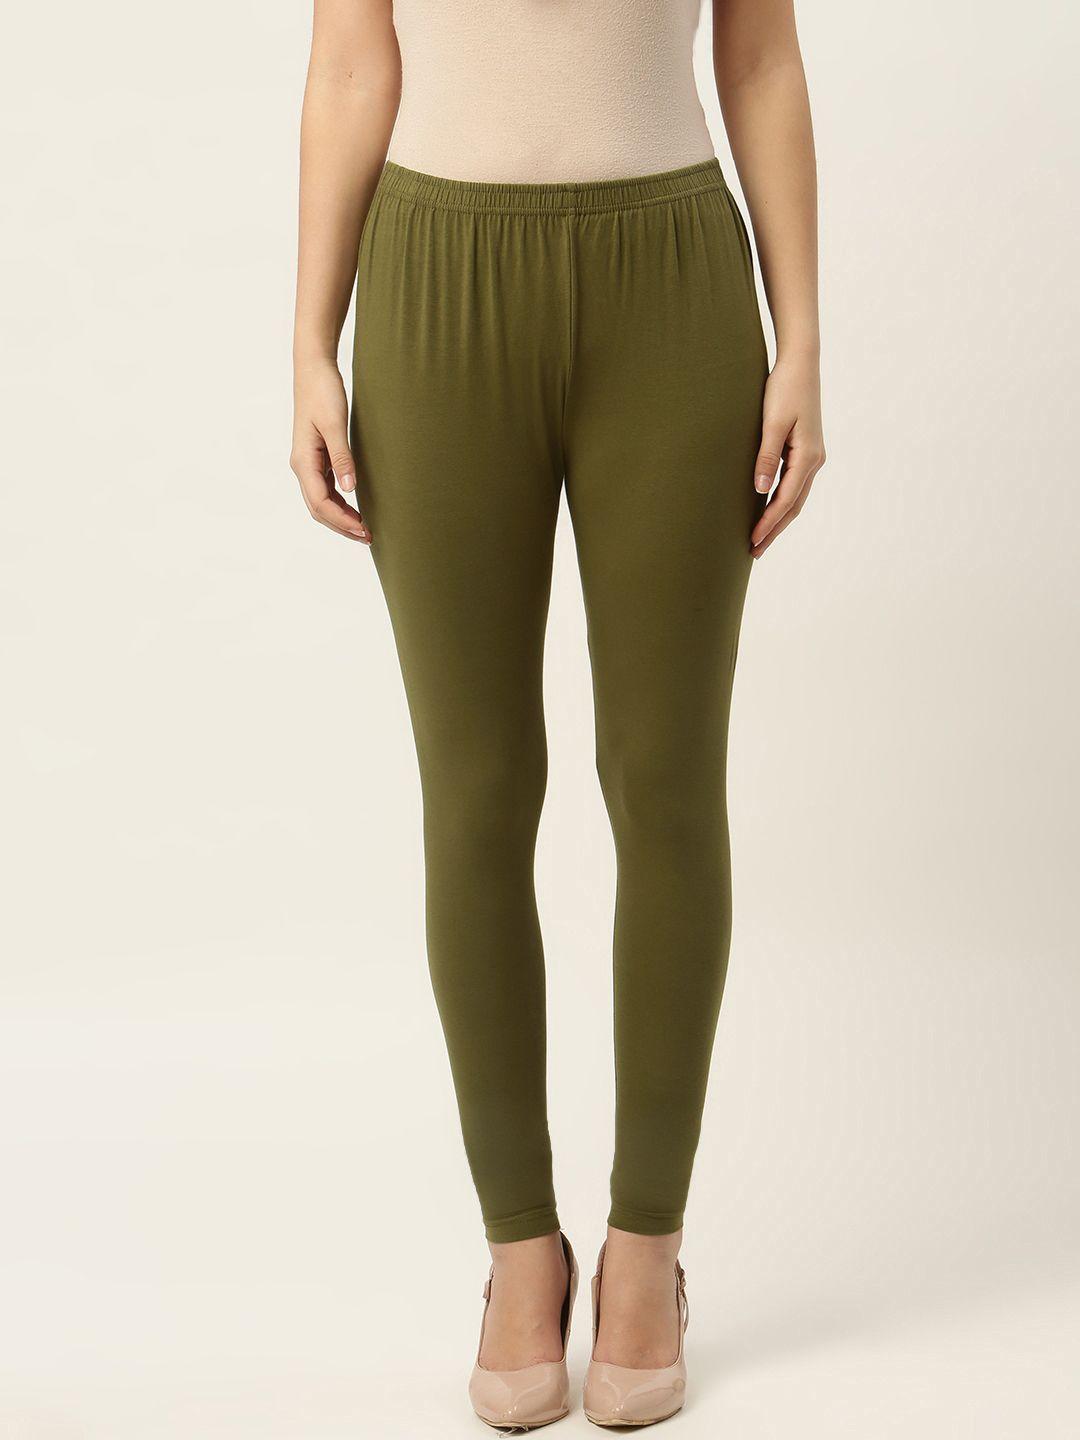 ms.lingies women olive green solid ankle-length leggings